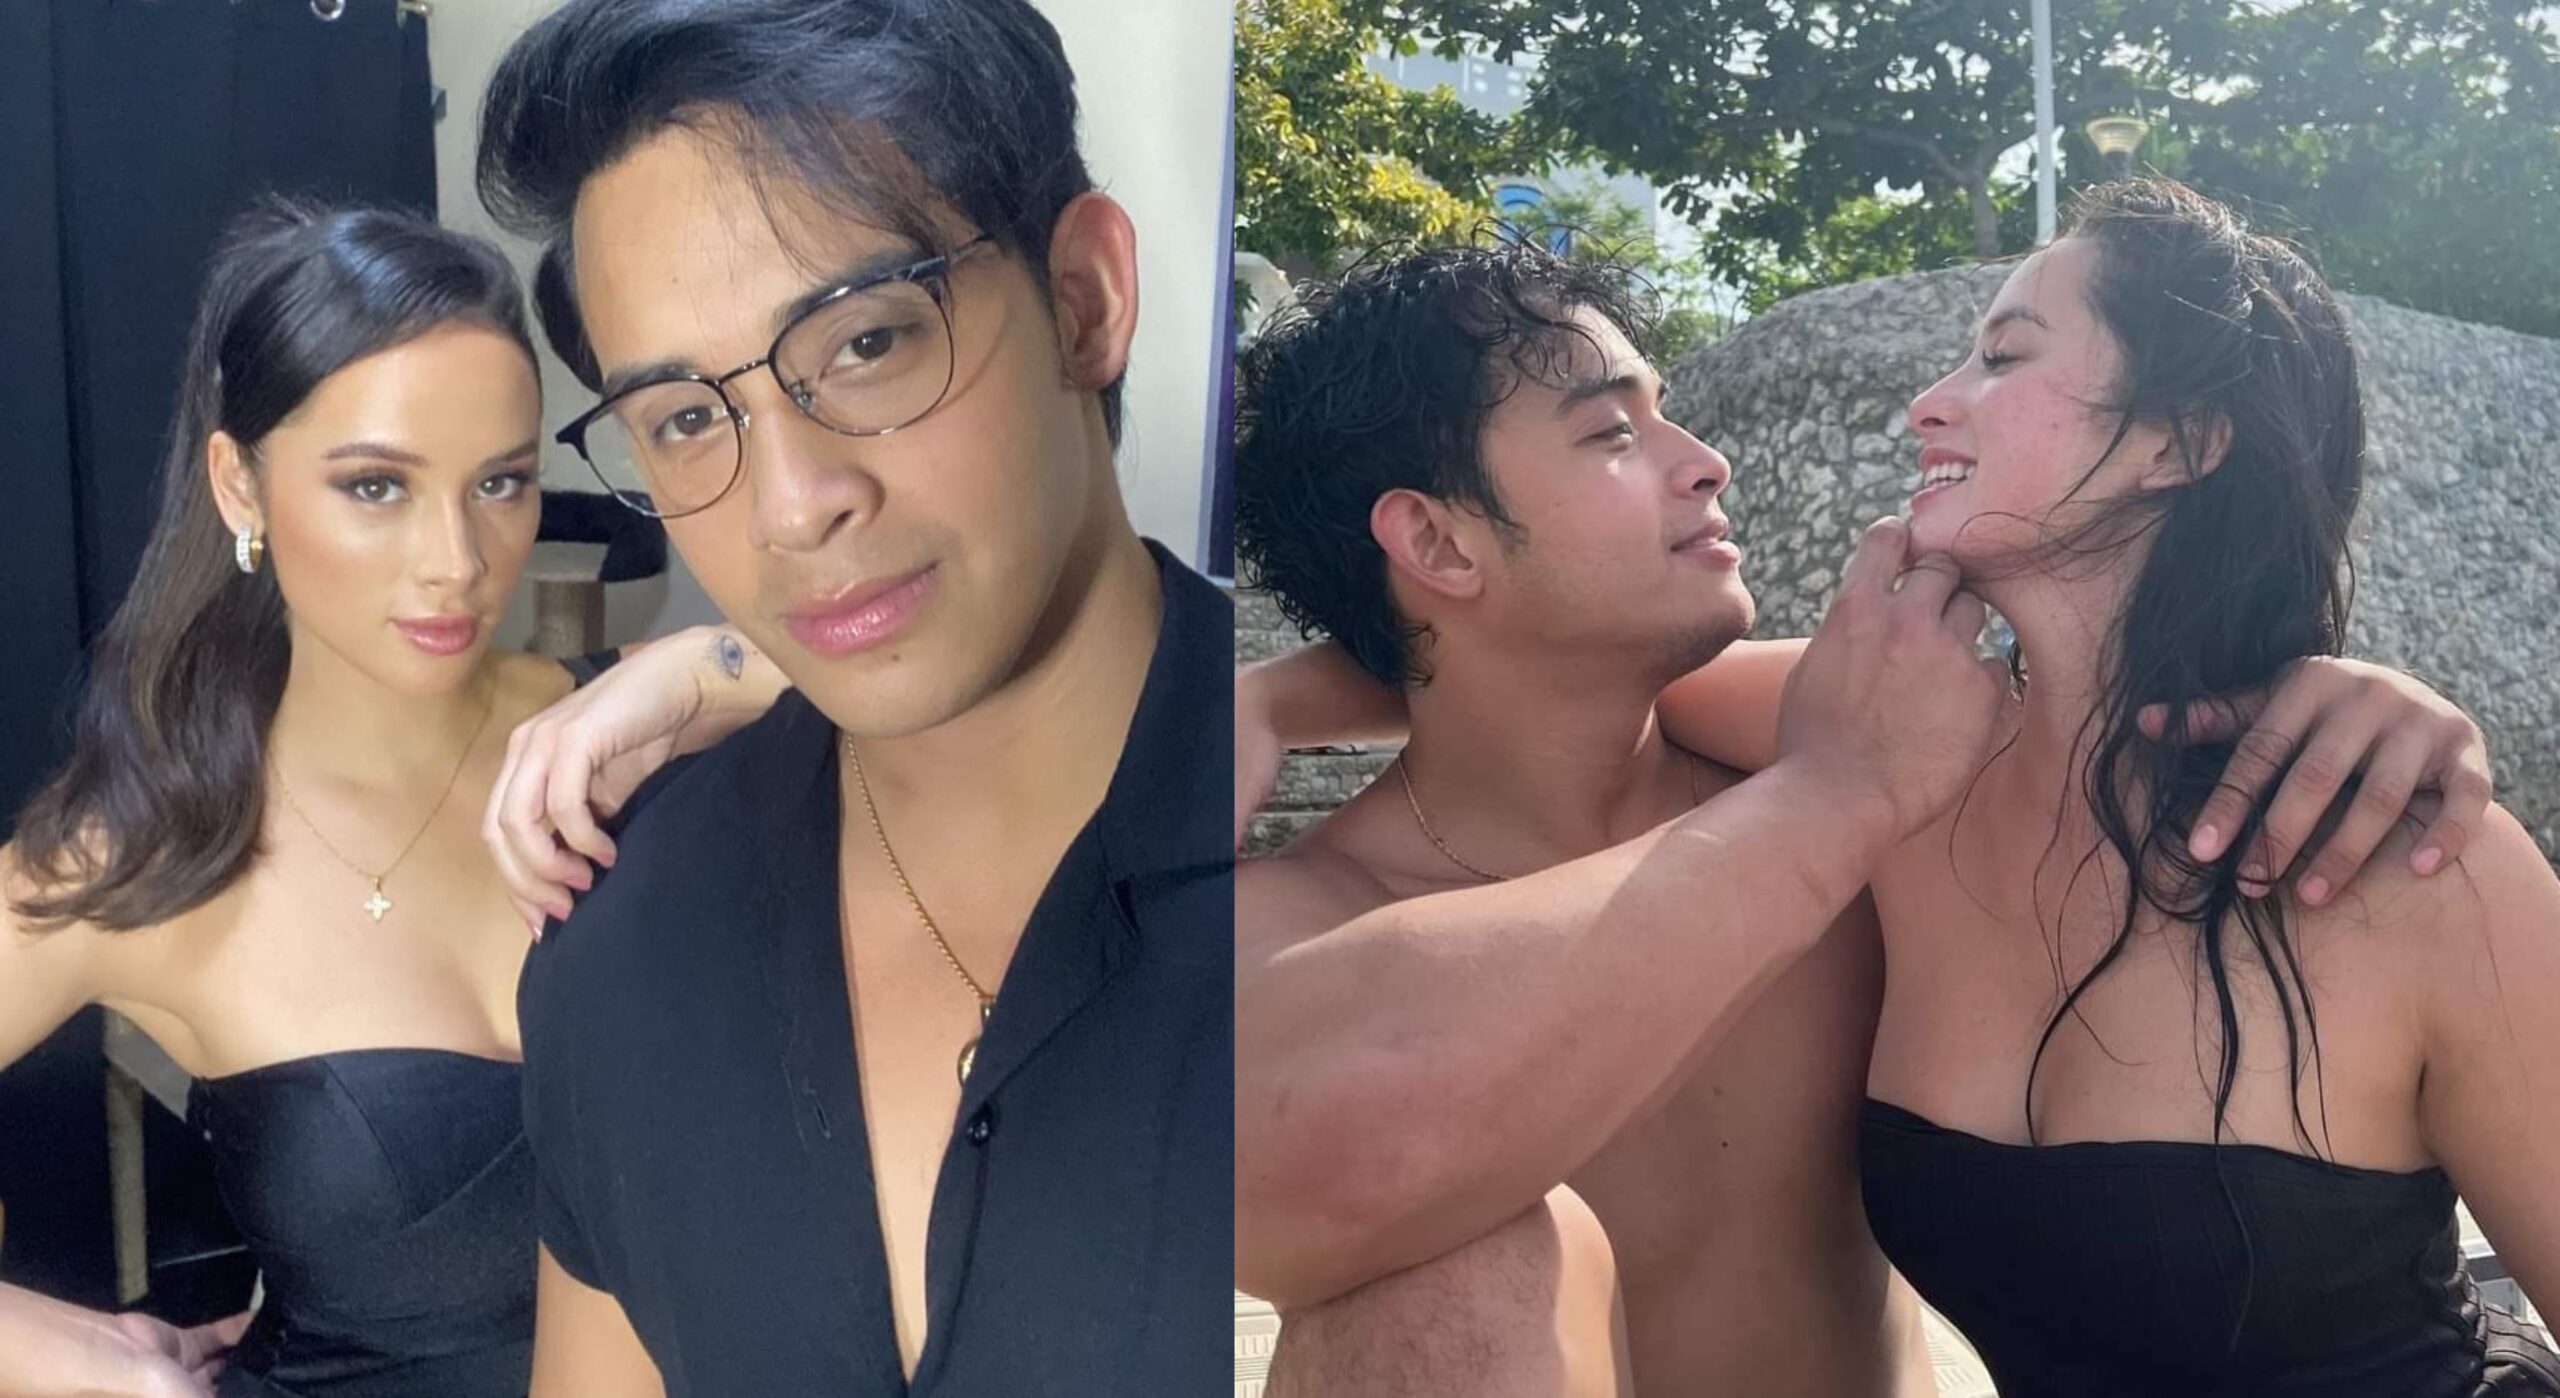 Are Diego Loyzaga and Franki Russell dating?